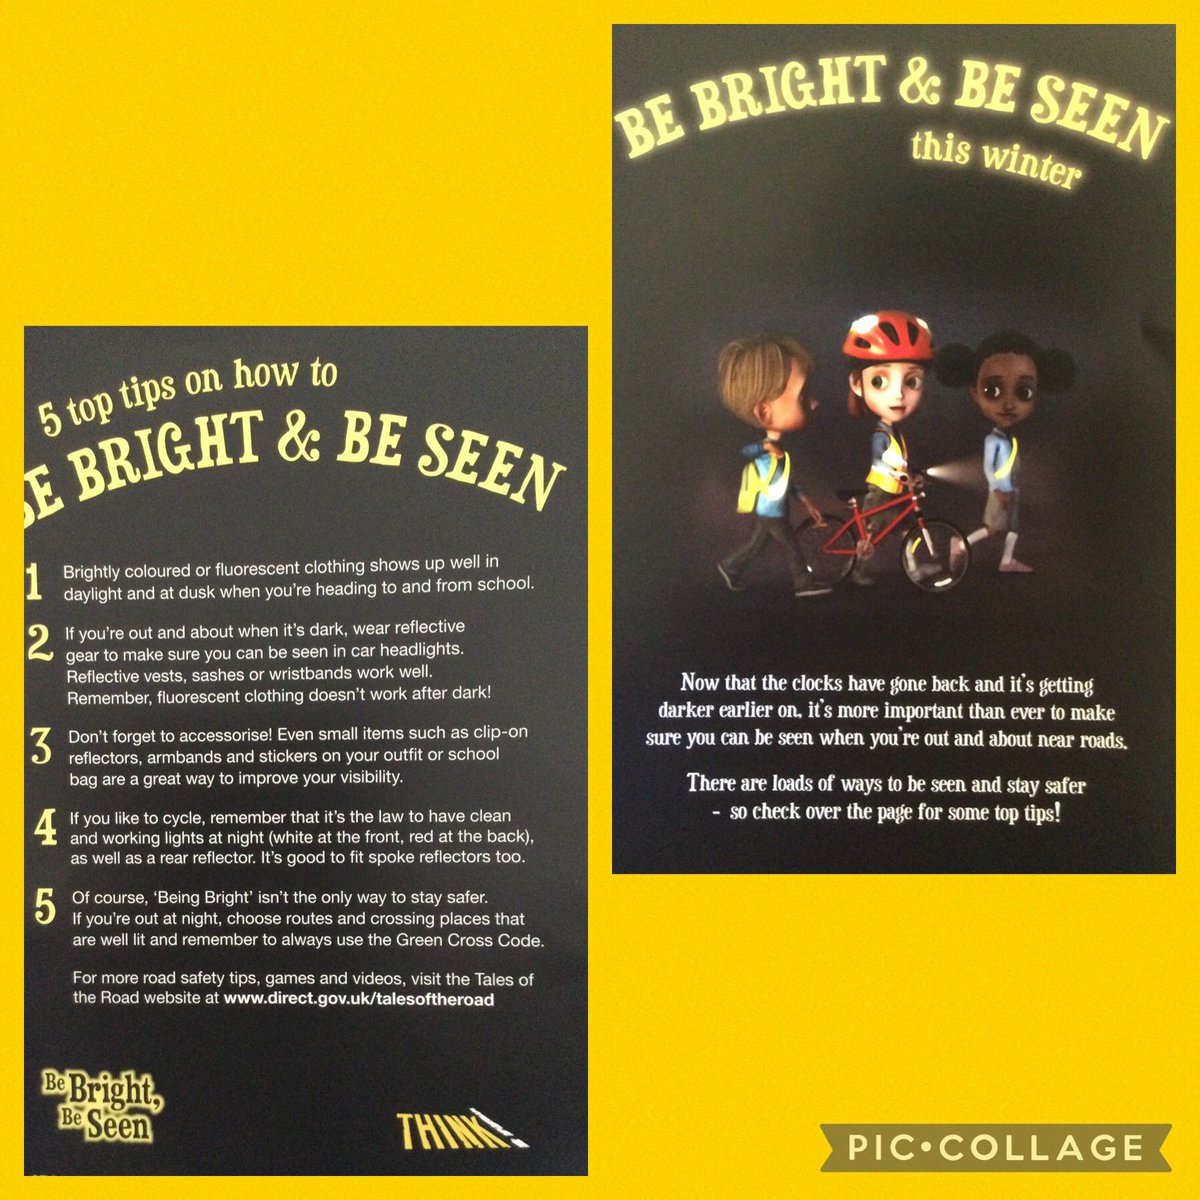 Today our year 1 children will bring home a leaflet to remind them how to stay safe on and near the road. Please read through this with your children and practise road safety at all times. 

#bebrightbeseen